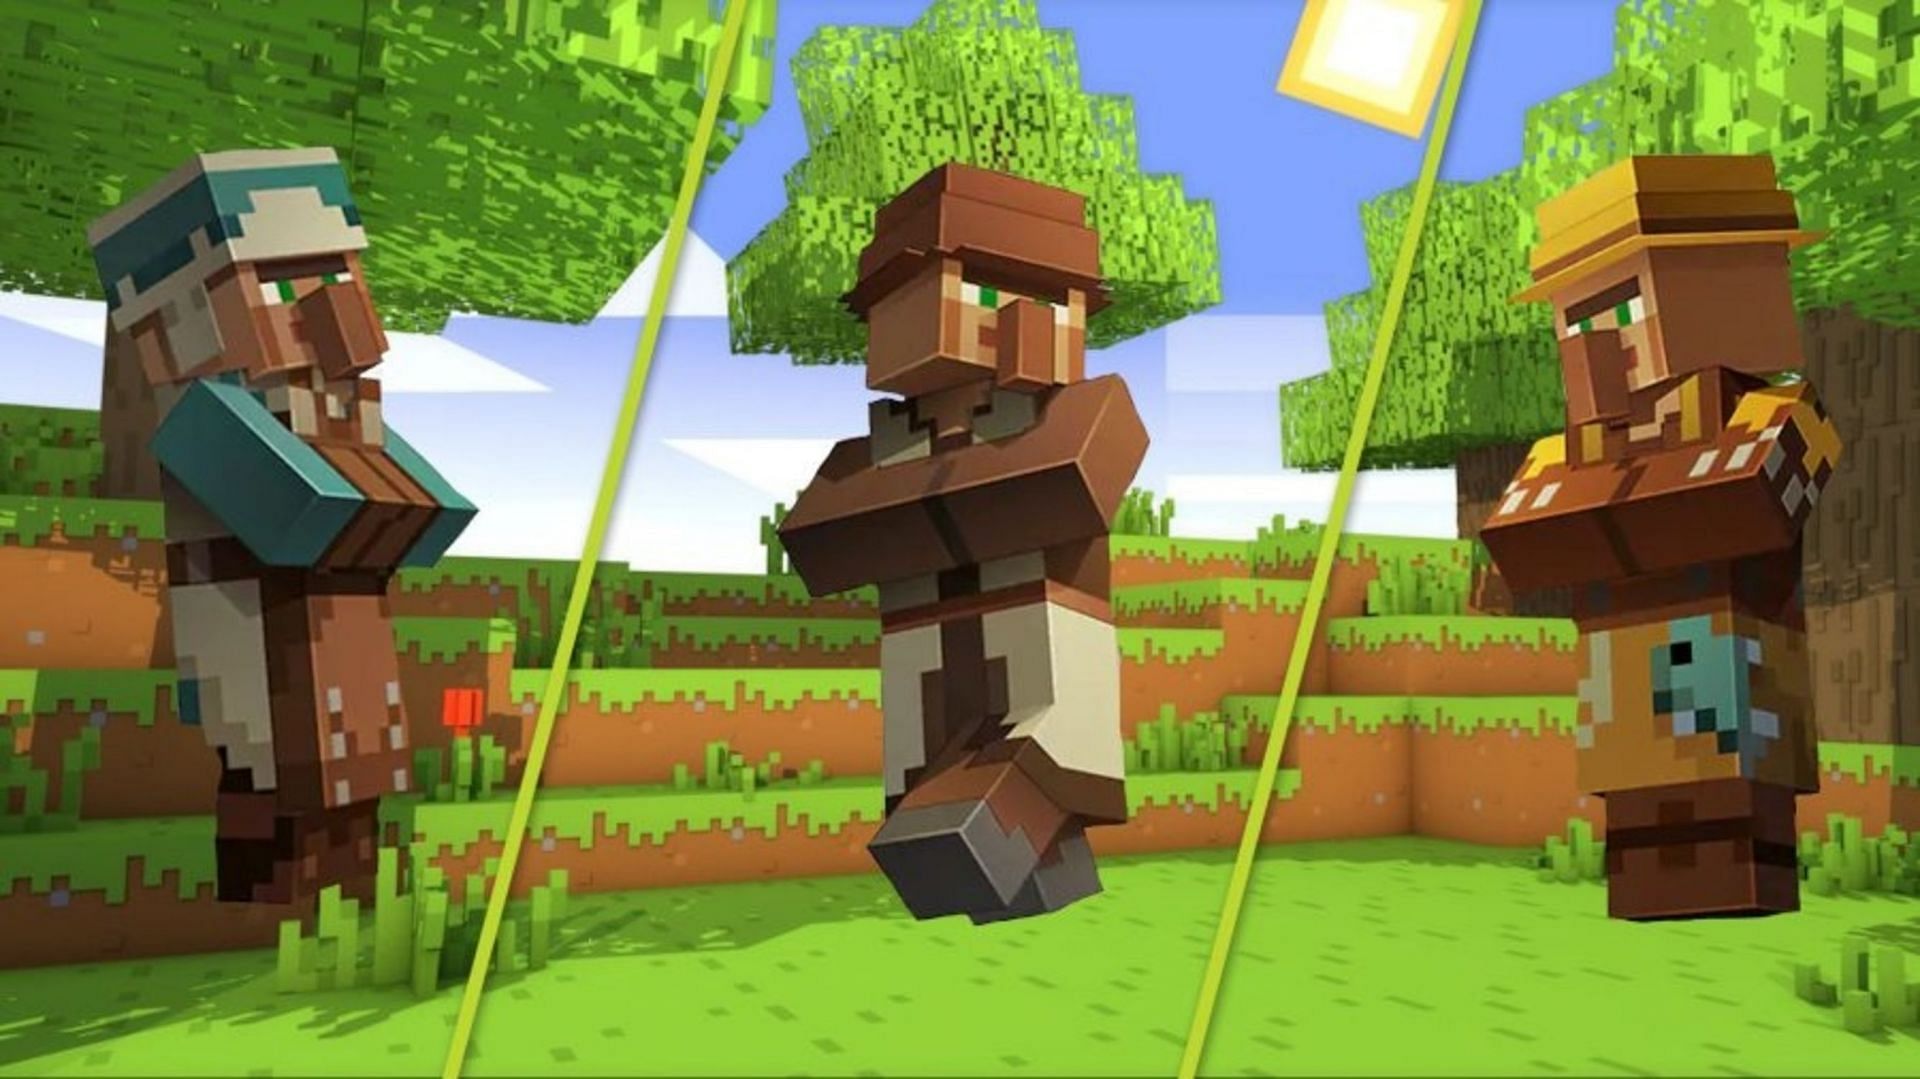 Moving villagers can be tricky, but Minecraft players have plenty of options to do so (Image via Mojang)